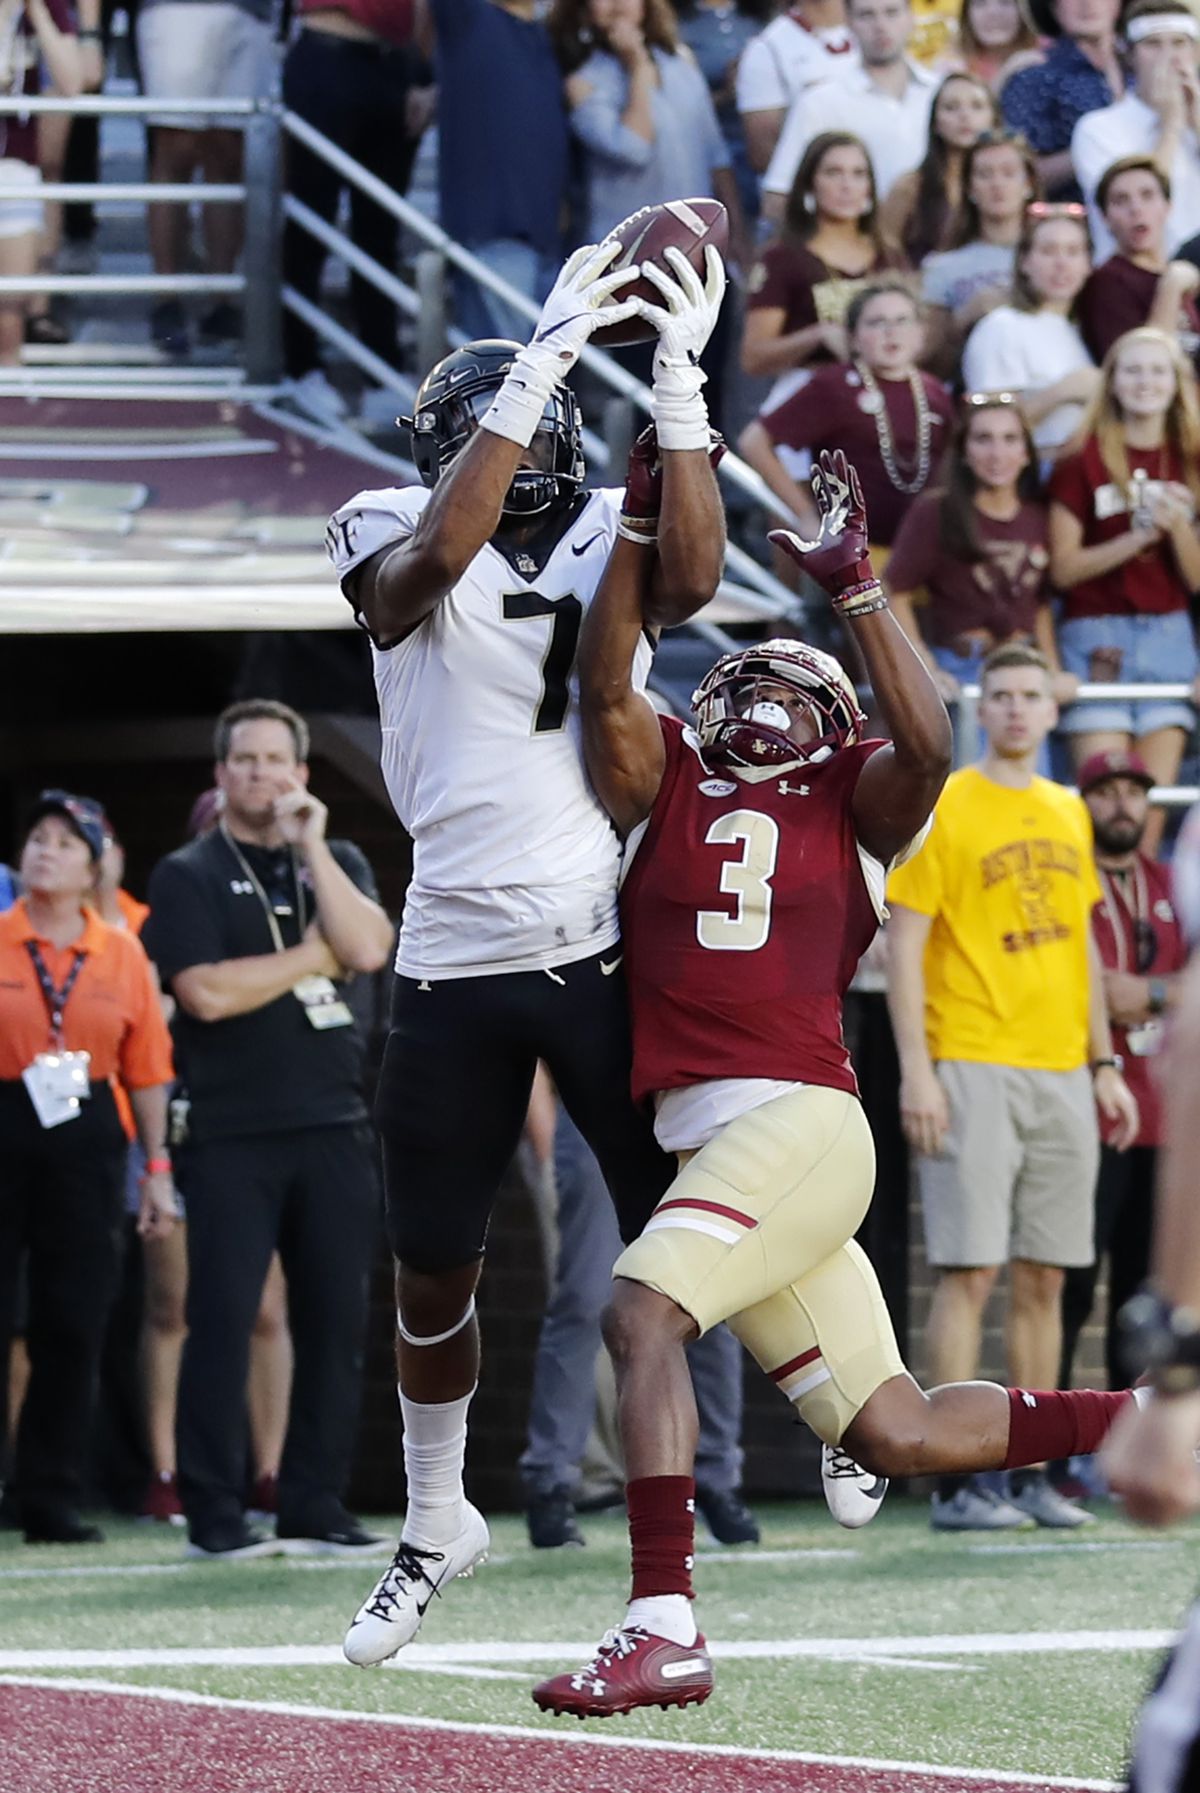 COLLEGE FOOTBALL: SEP 28 Wake Forest at Boston College